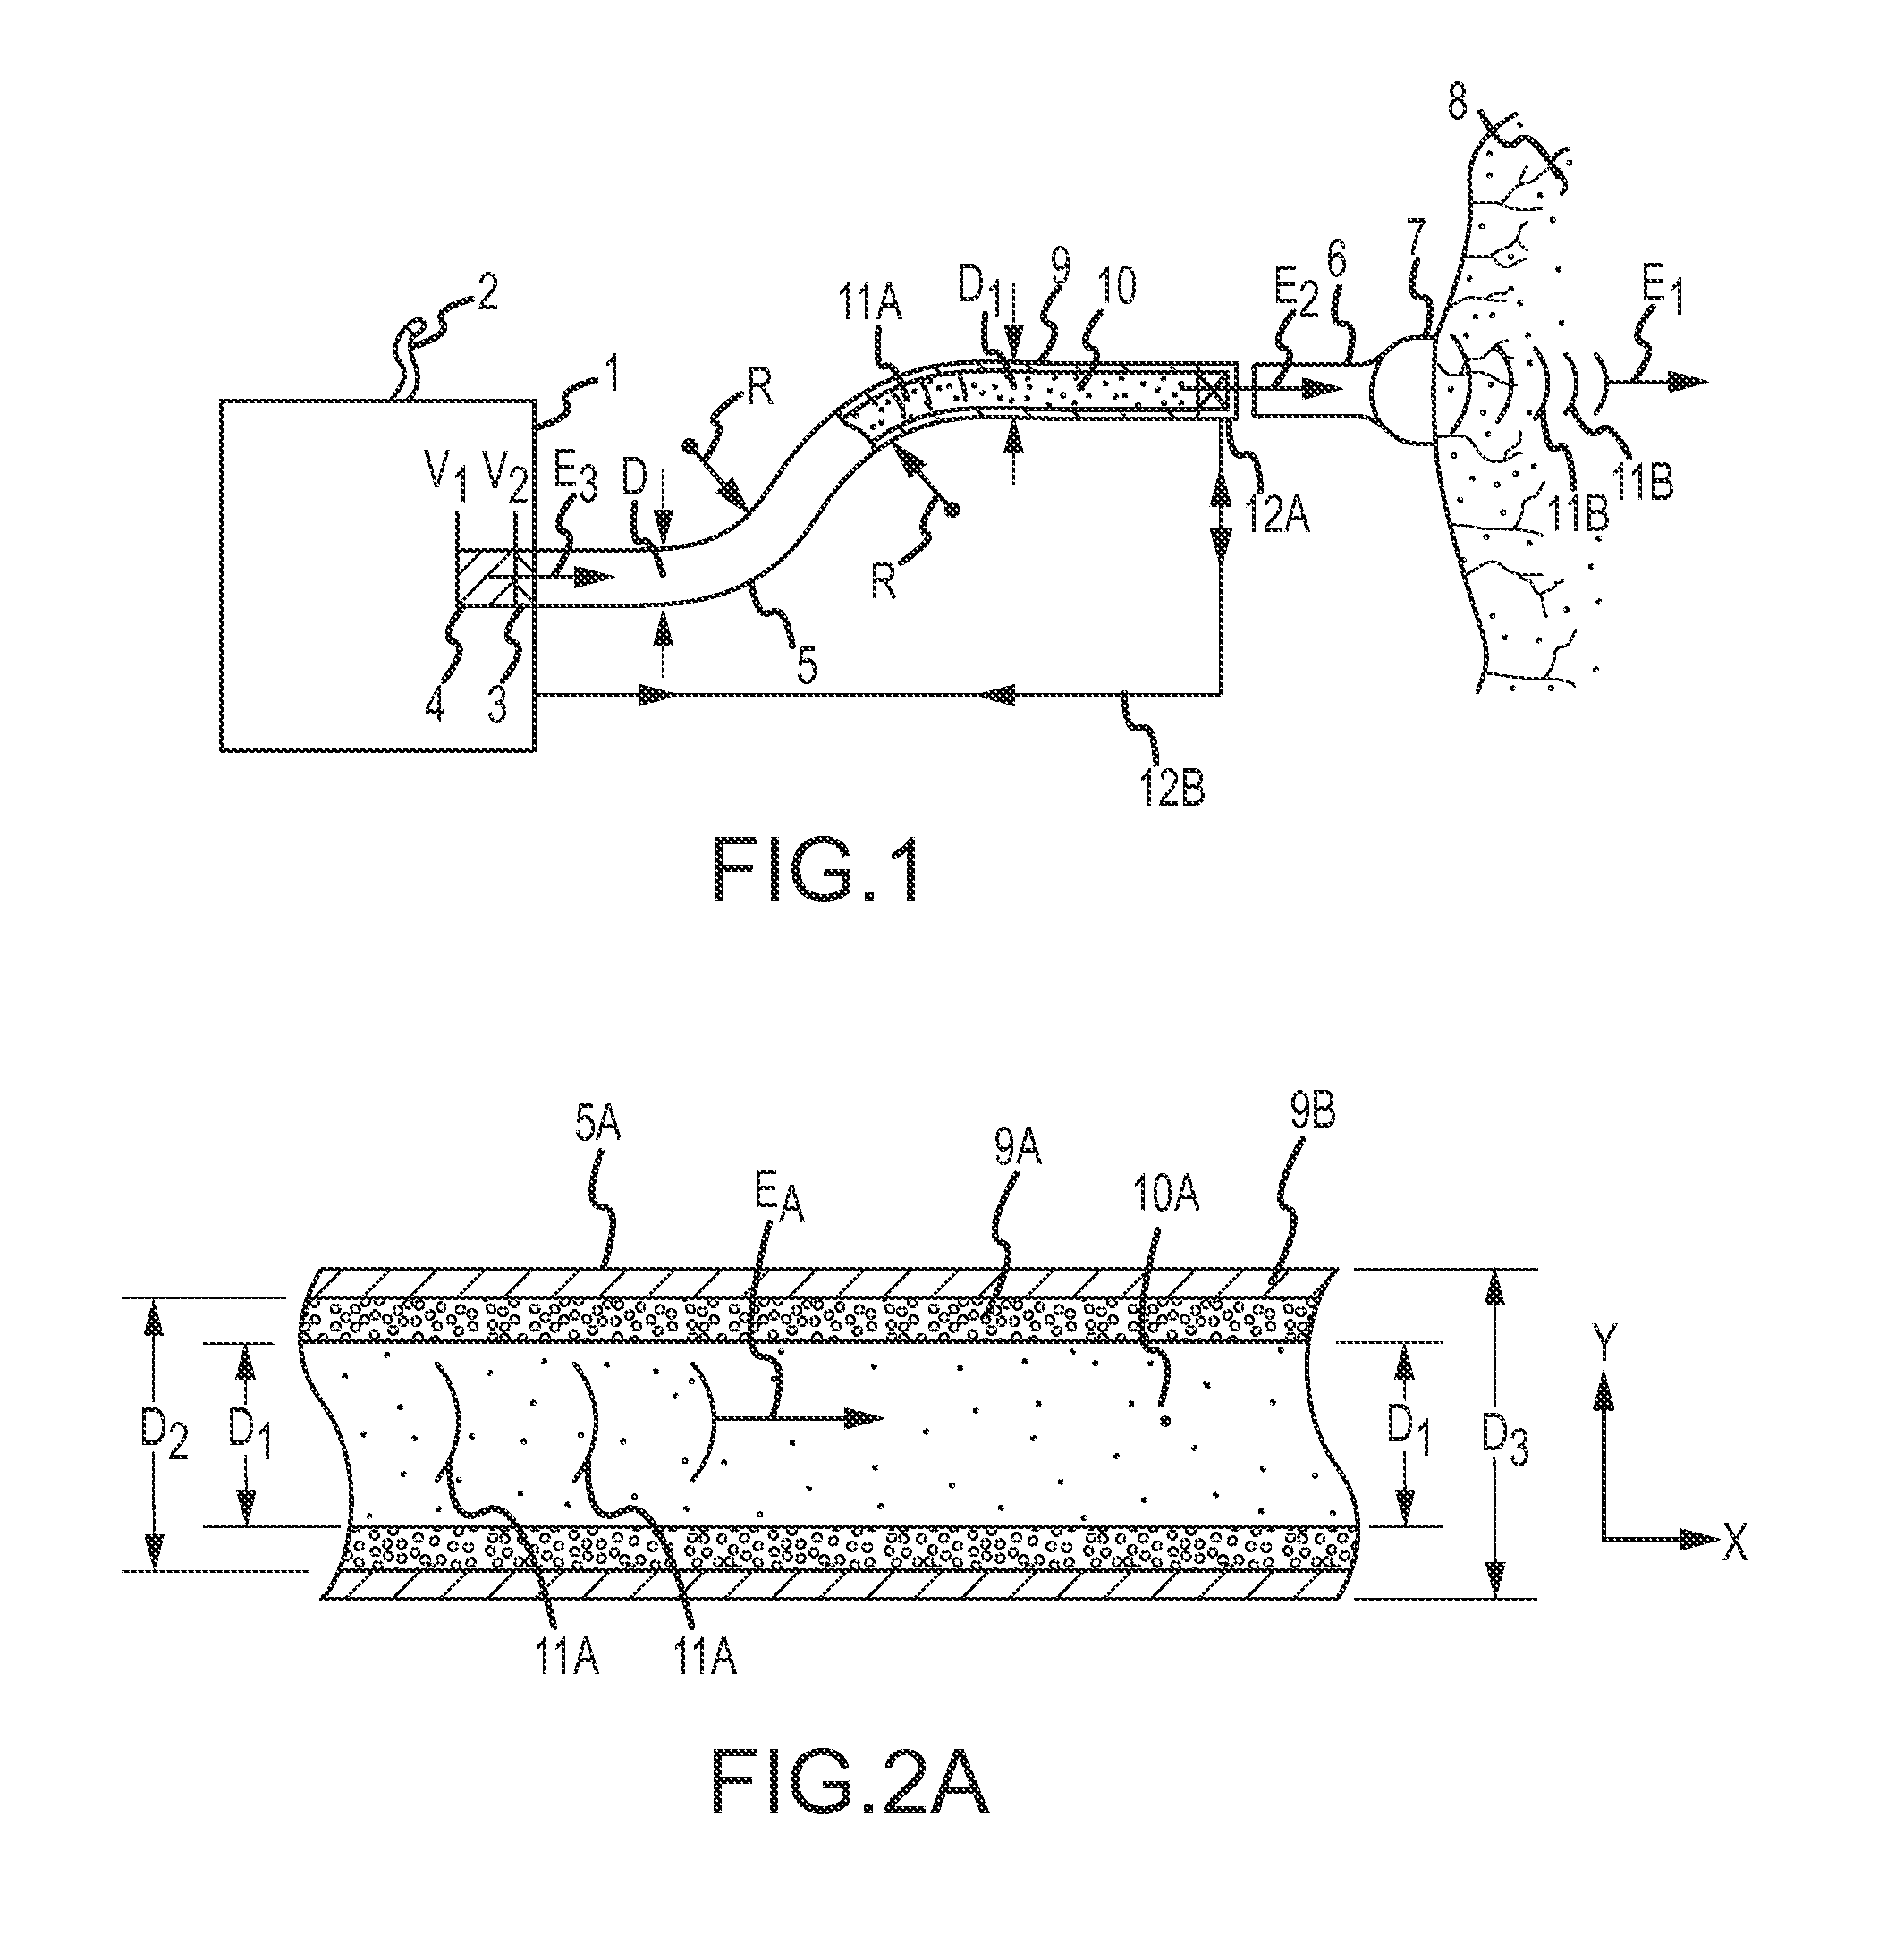 System for delivering acoustic energy in connection with therapeutic ultrasound systems and catheters